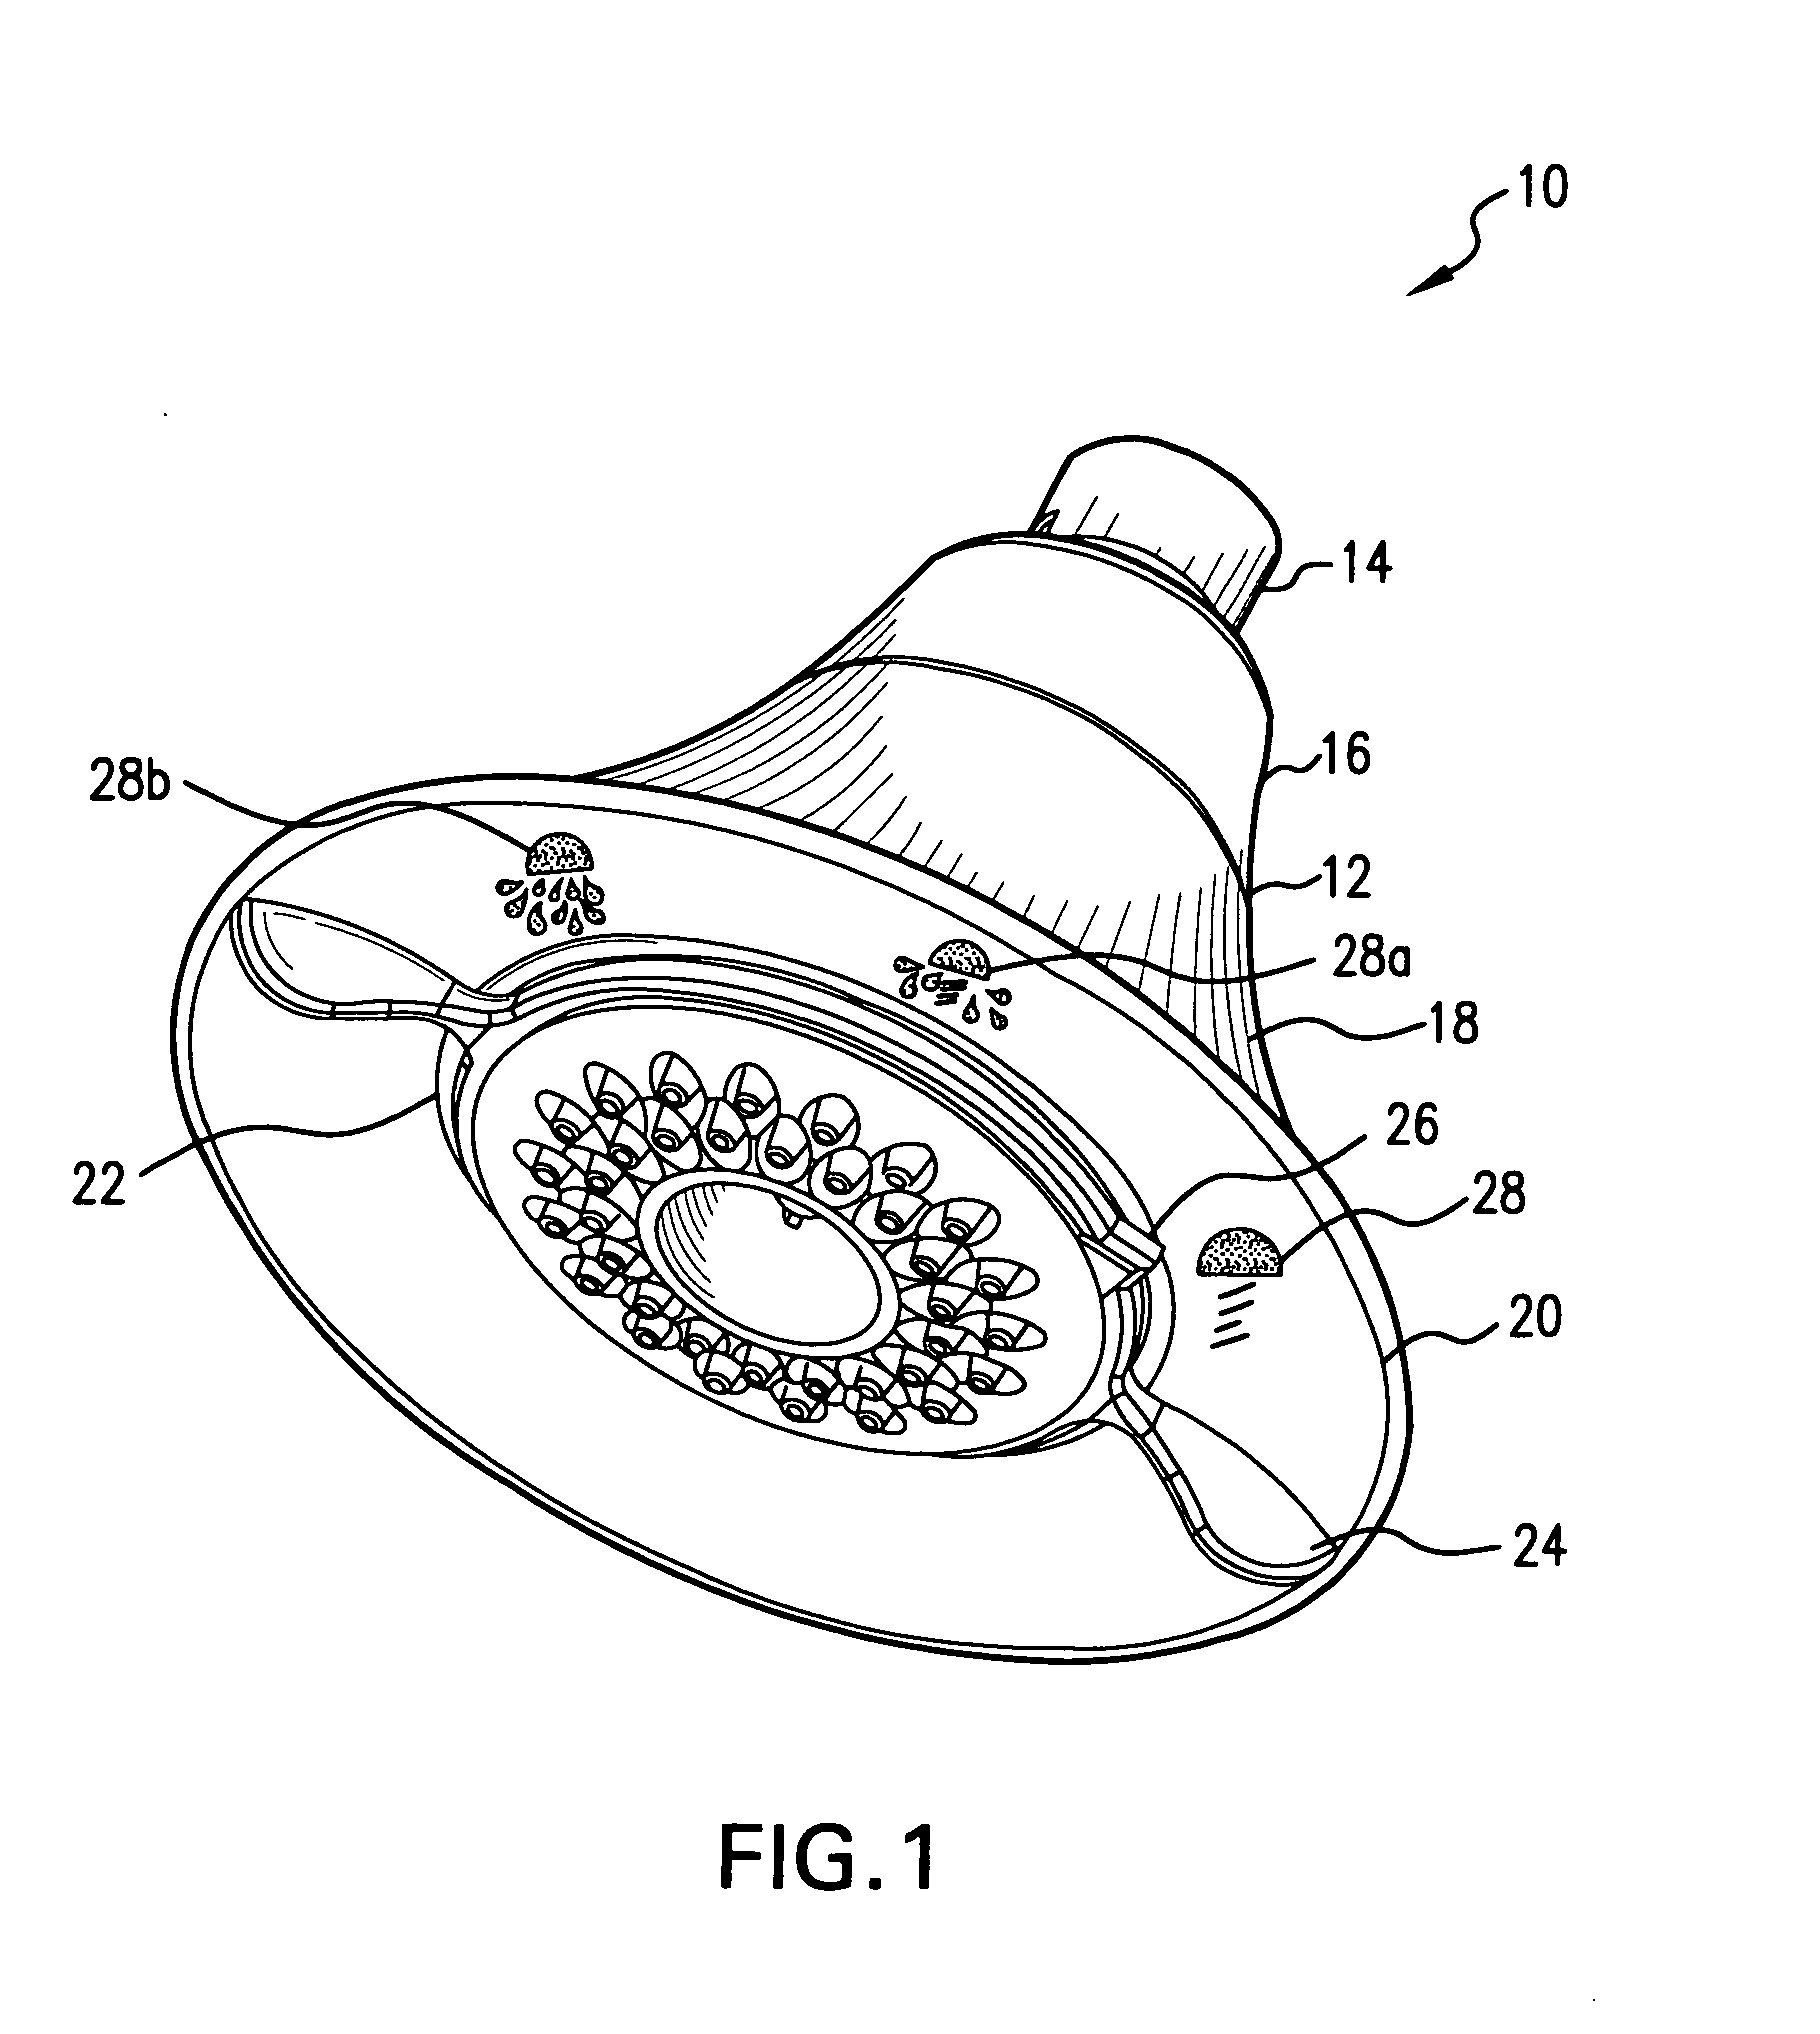 Multifunction showerhead with automatic return function for enhanced water conservation